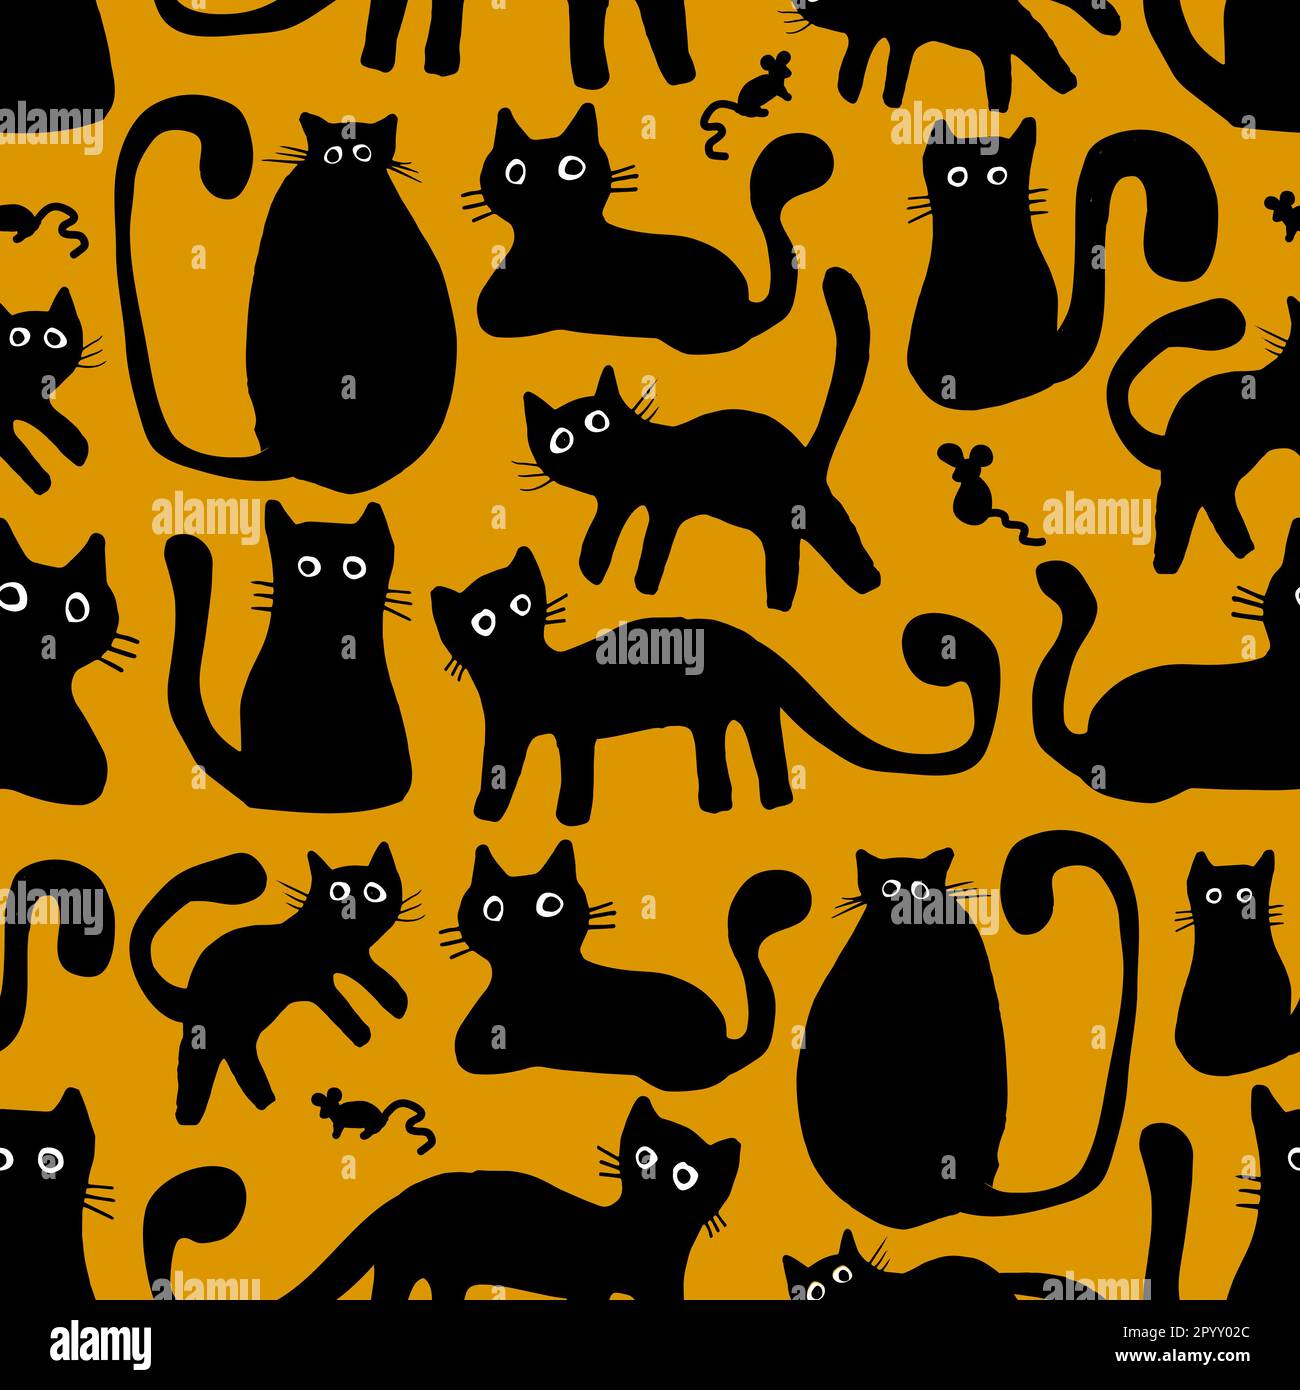 Black cats doodle seamless pattern design. Domestic animal elements in hand drawn style on isolated yellow background. Use for fabric, wallpaper and w Stock Vector